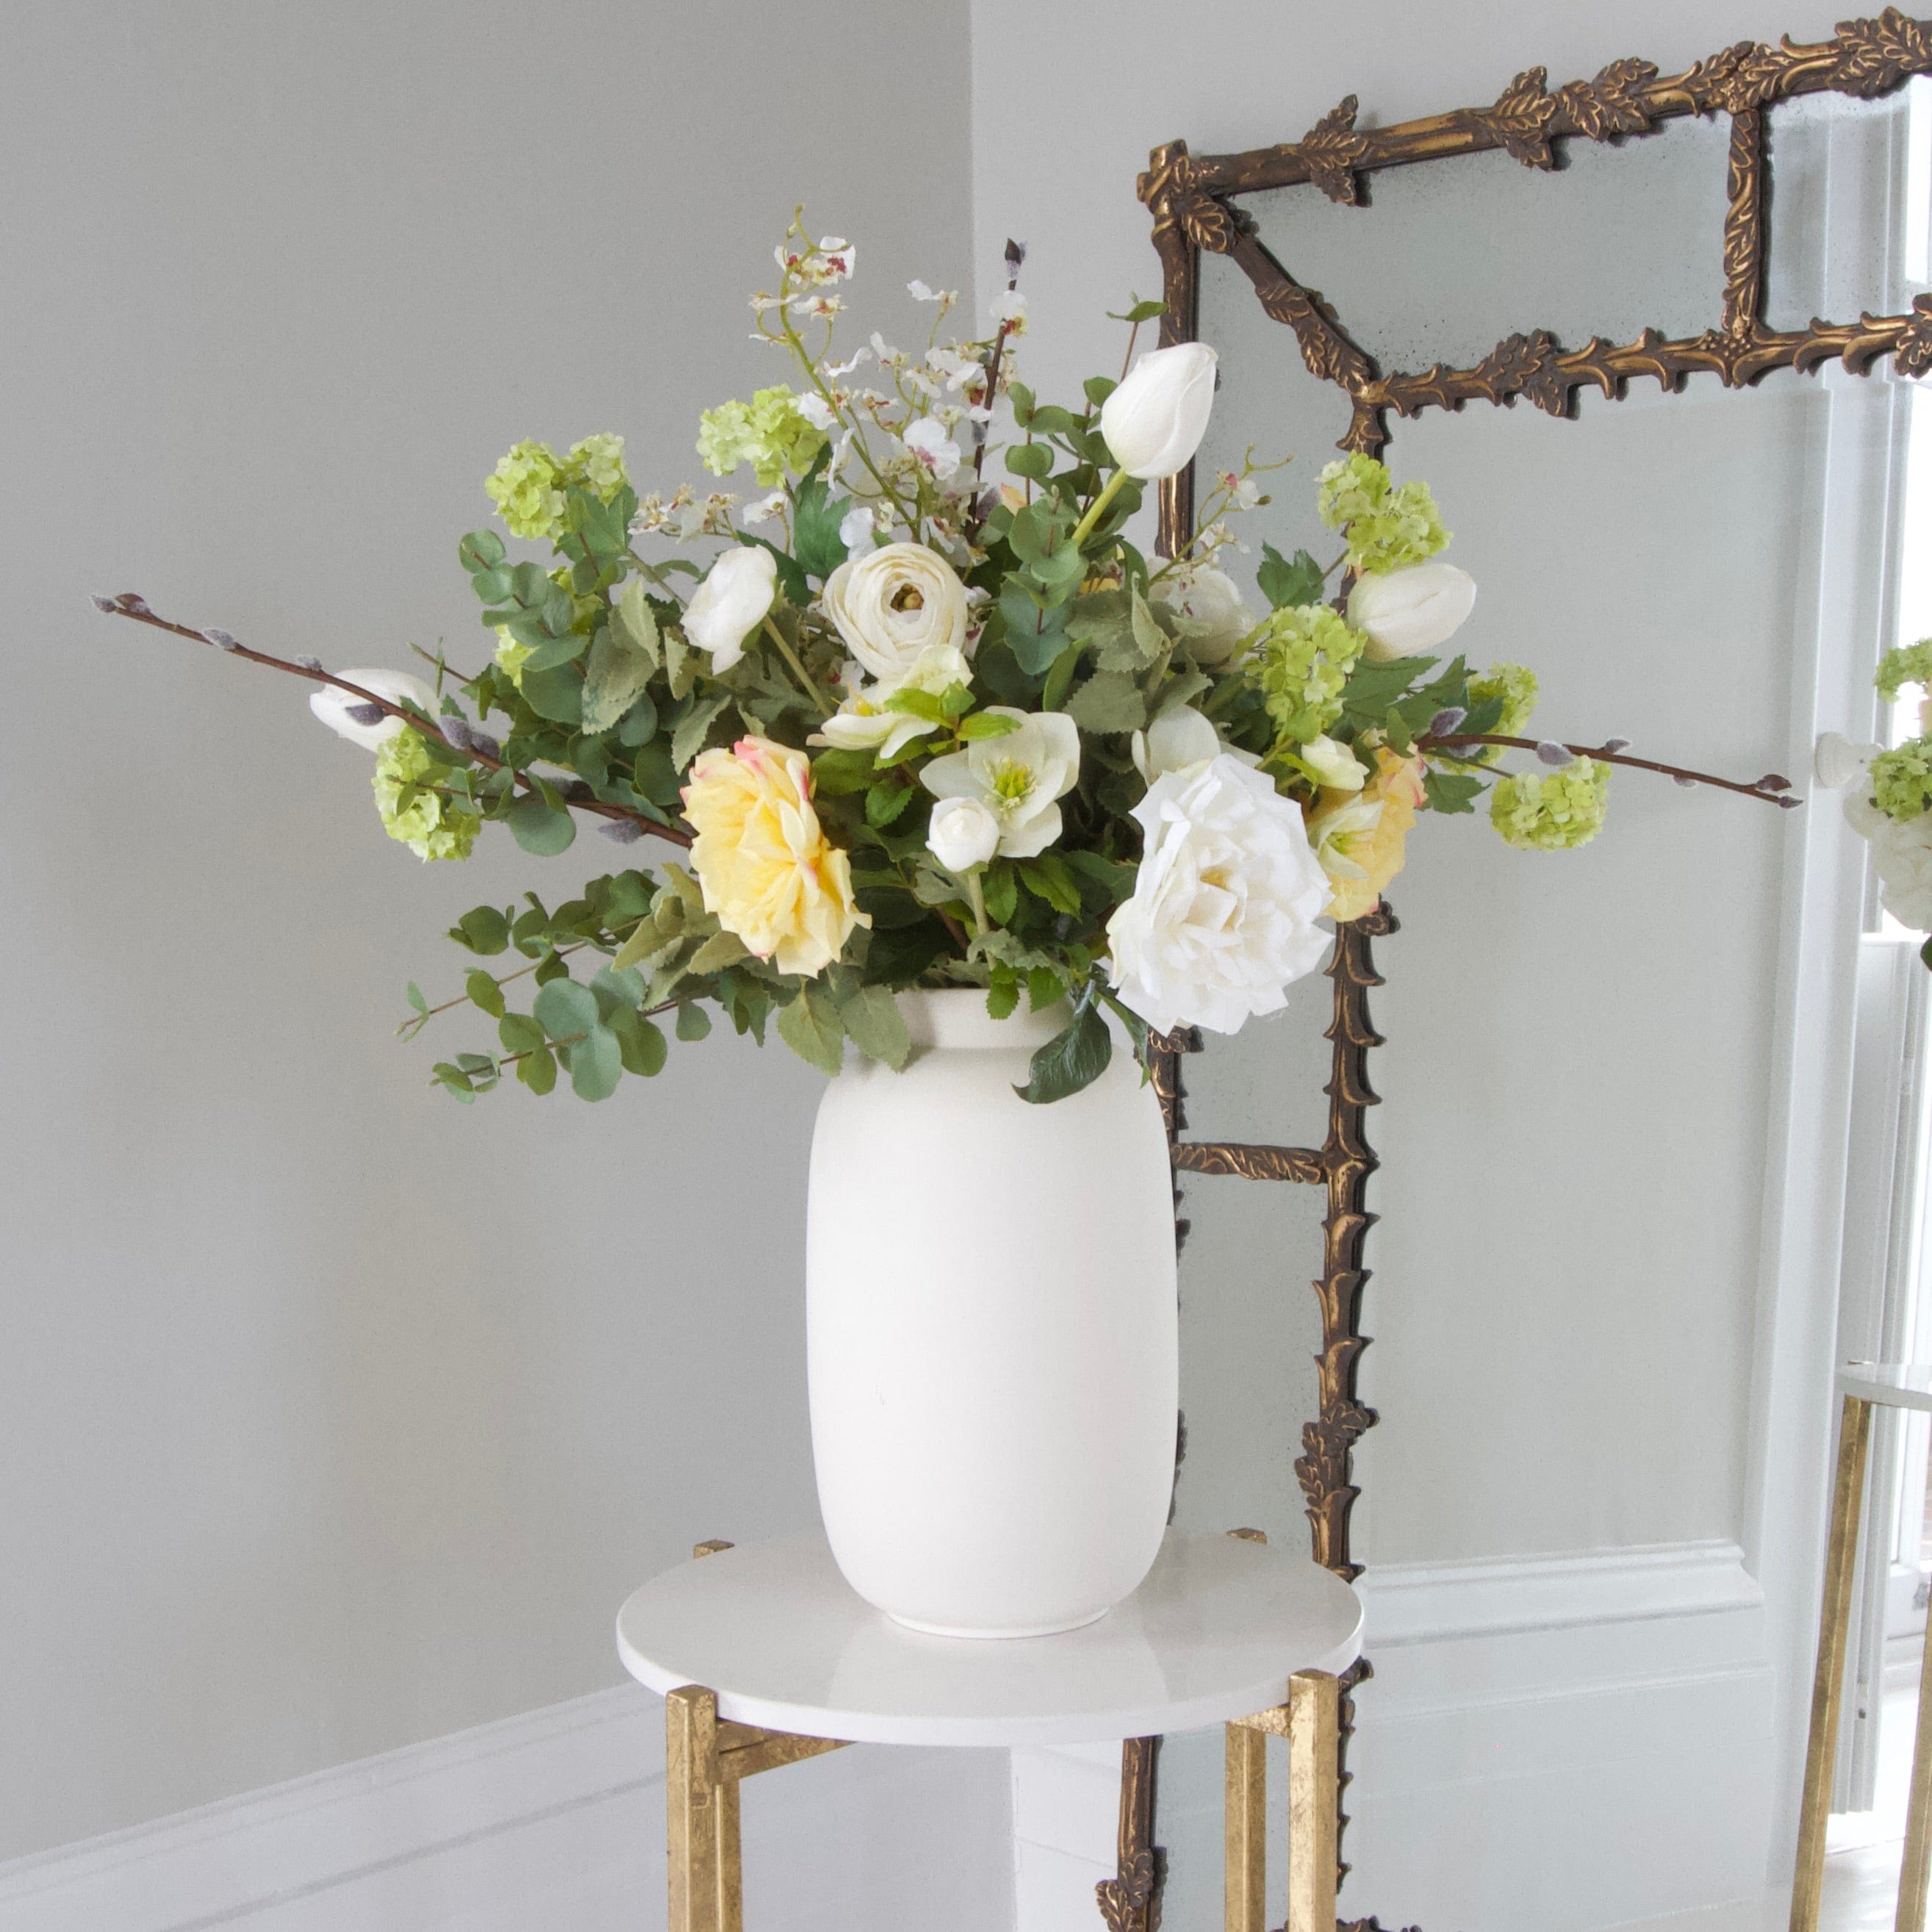 Luxury Lifelike Realistic Artificial Fabric Silk Blooms with Foliage Buy Online from The Faux Flower Company | Spring Fling Neutral Yellow Bouquet Stem Arrangement